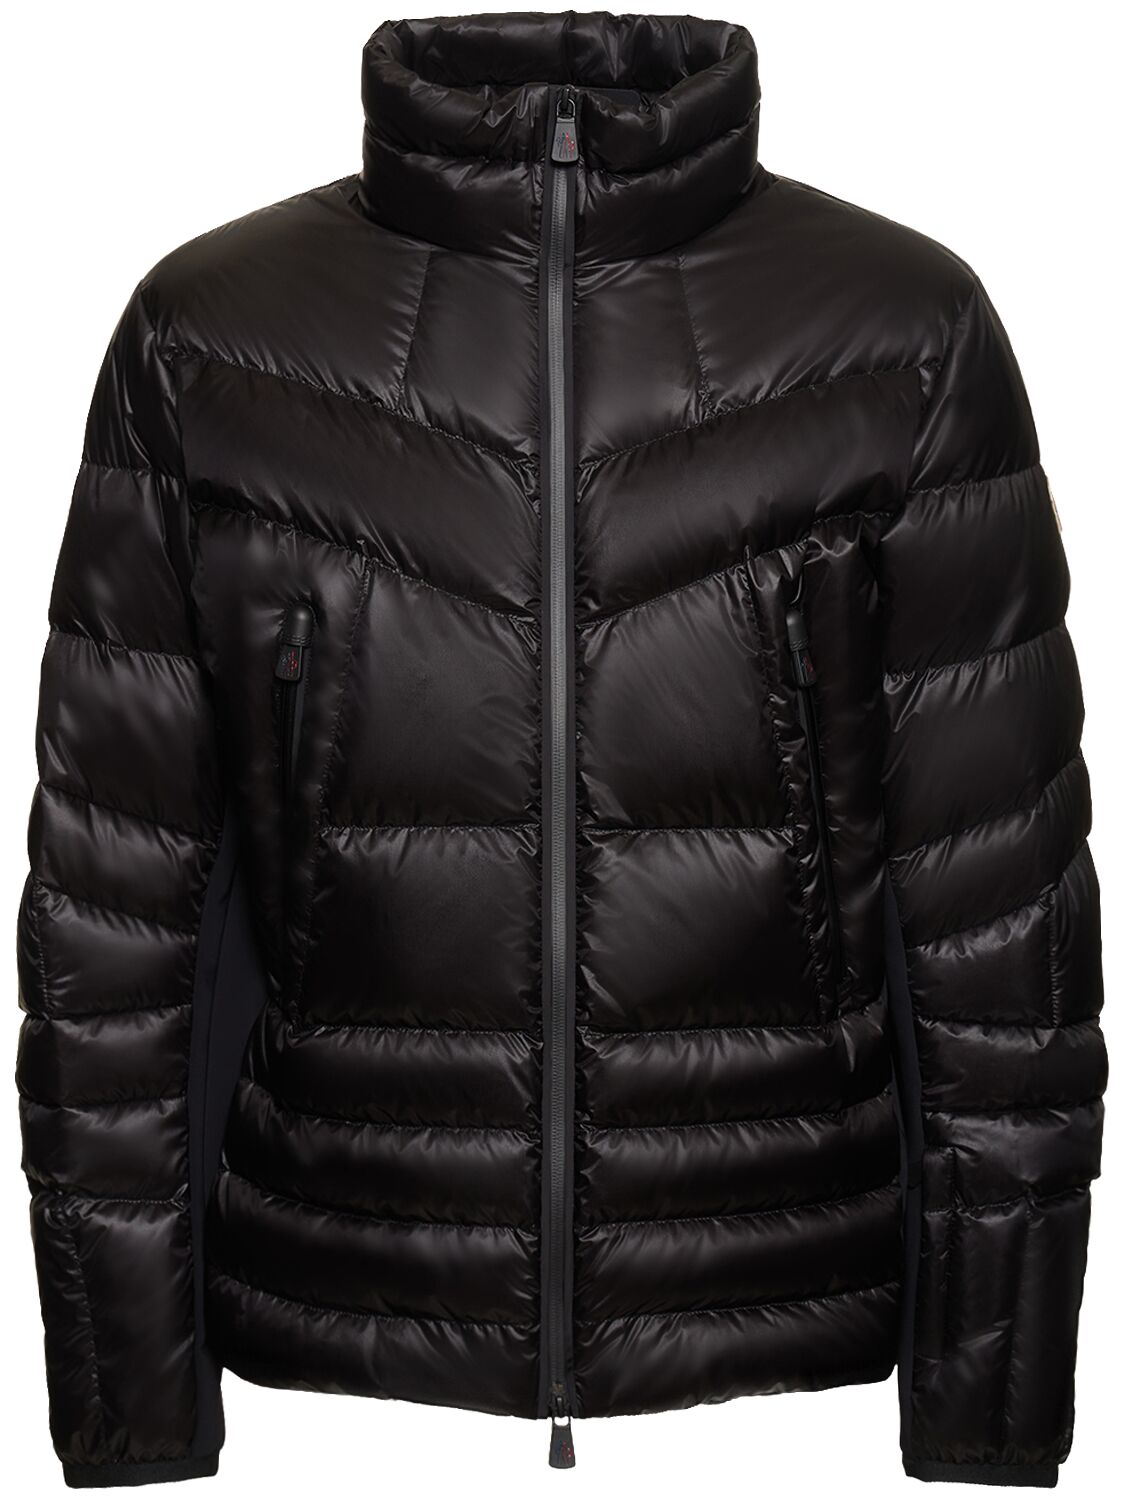 Image of Canmore Tech Down Jacket